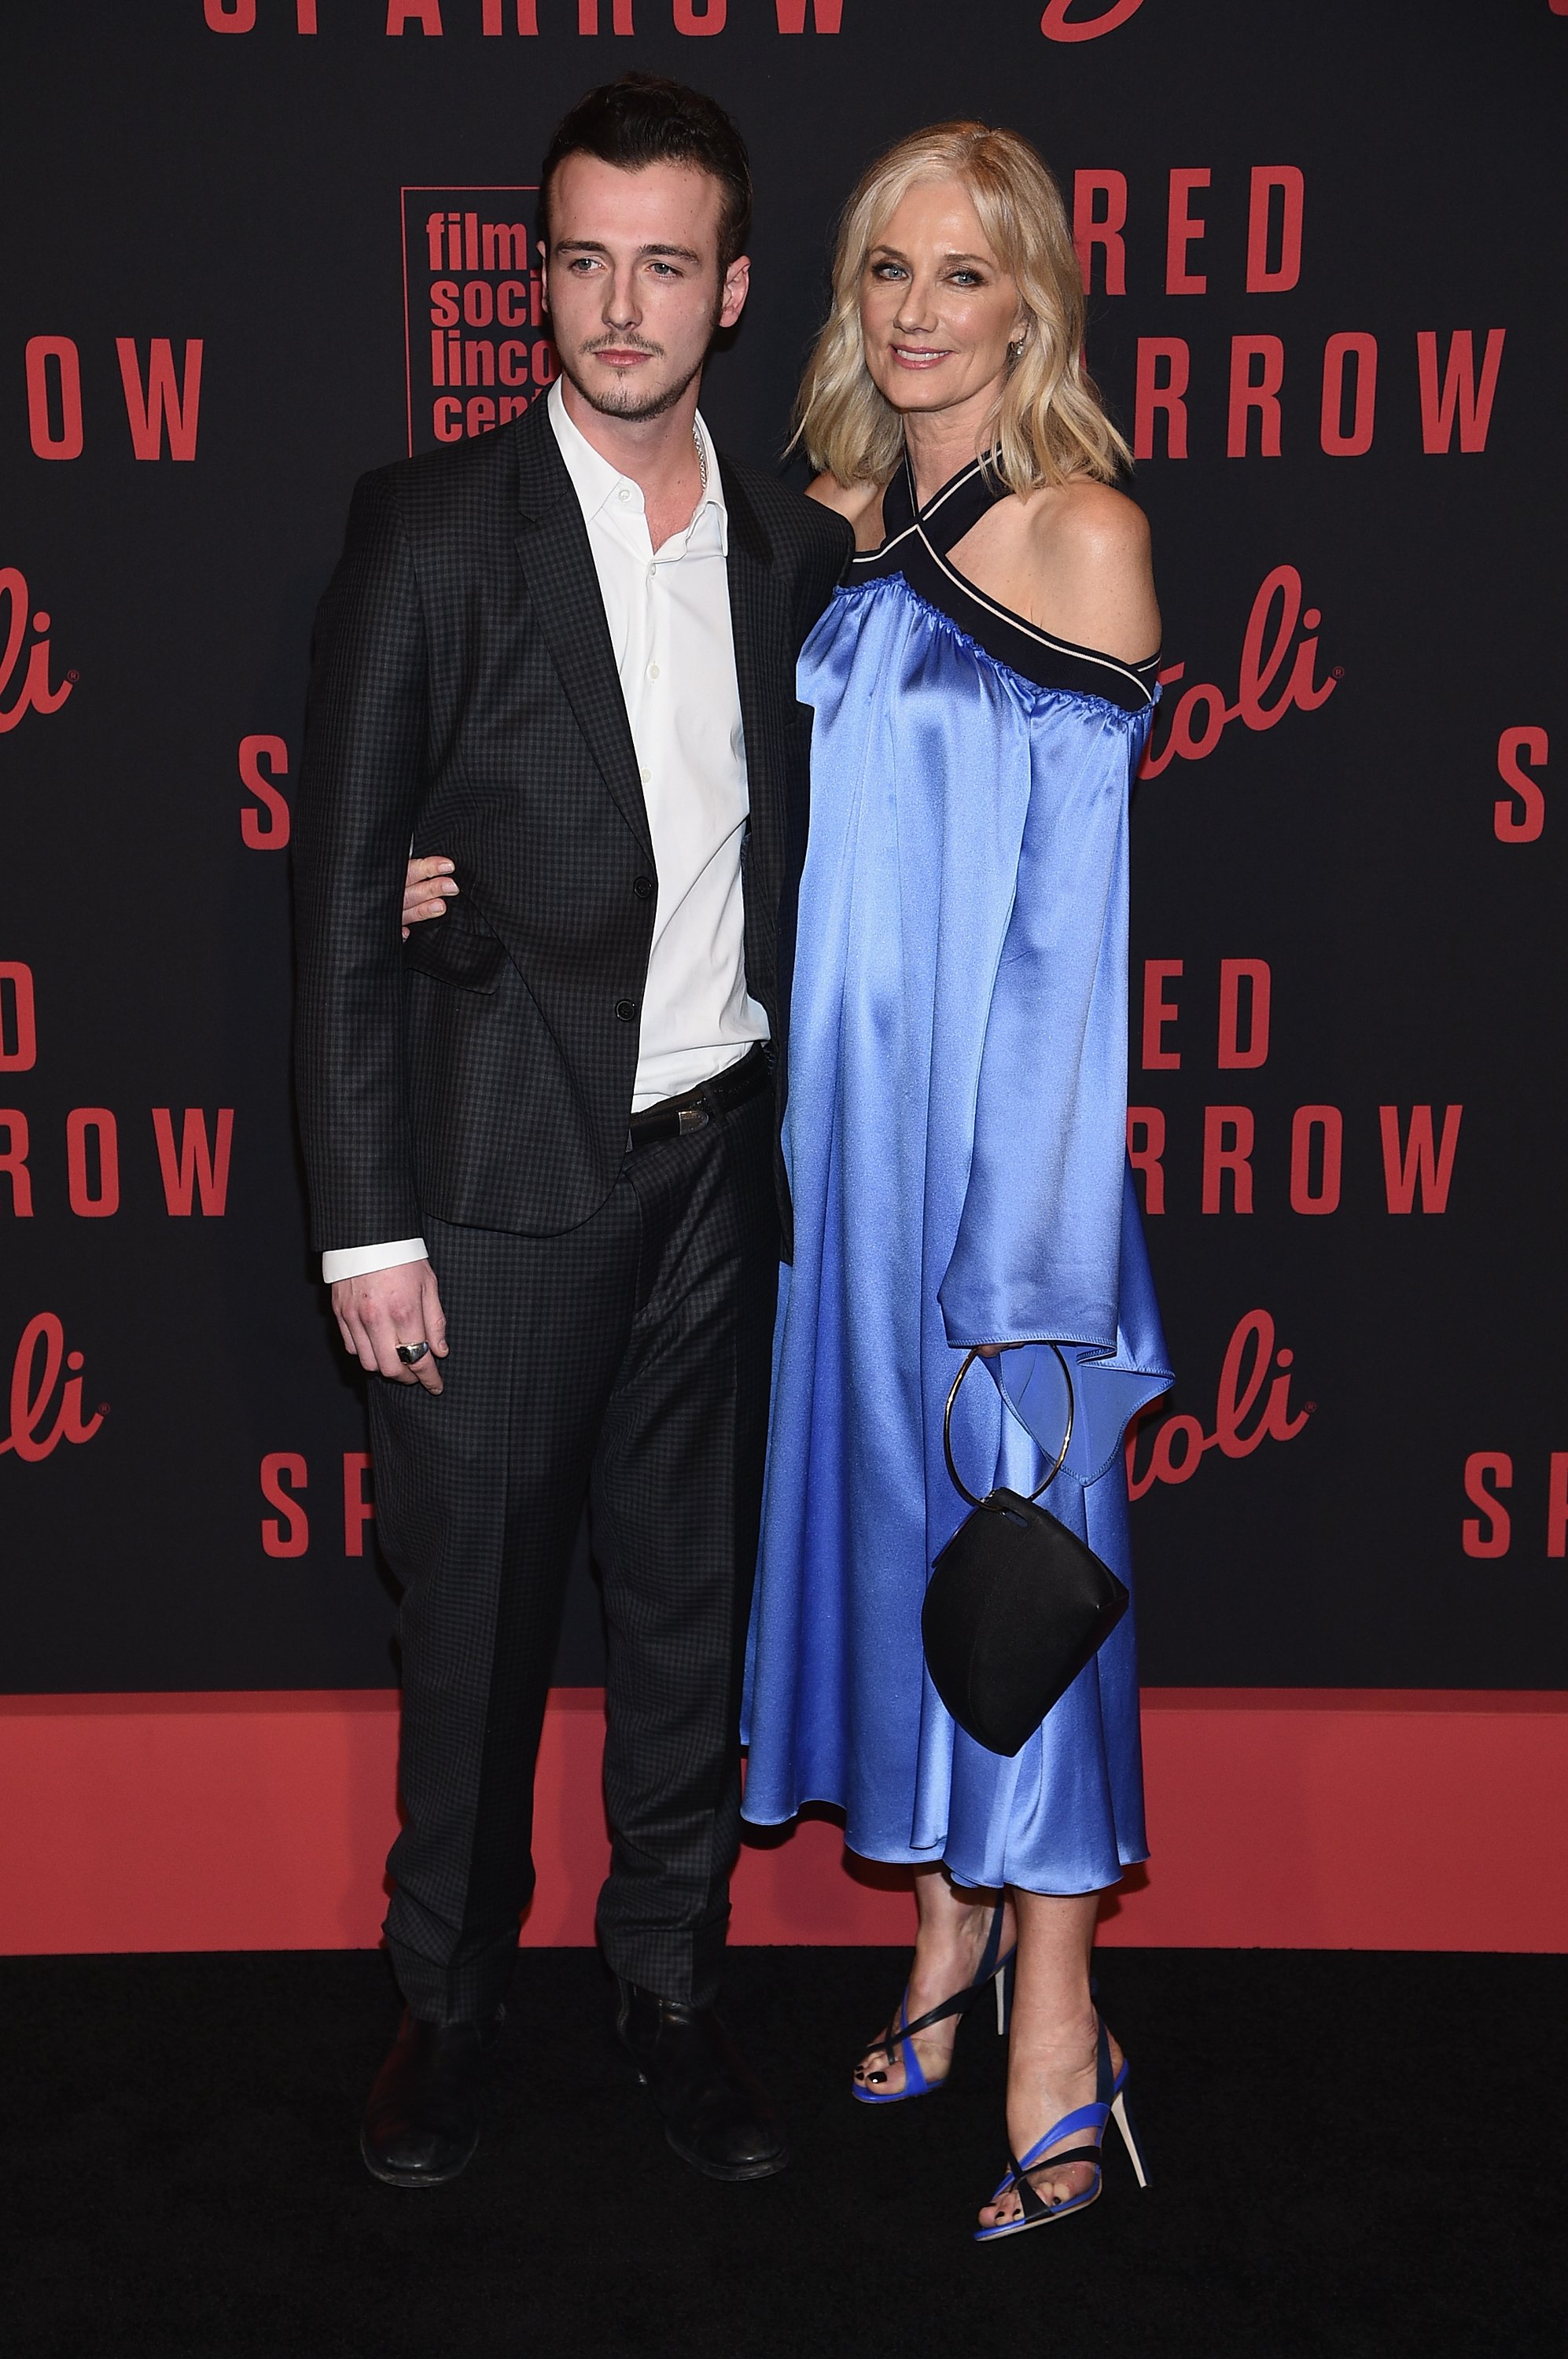 Micheál Richardson and Joely Richardson at the New York premiere of "Red Sparrow" on February 26, 2018 | Source: Getty Images